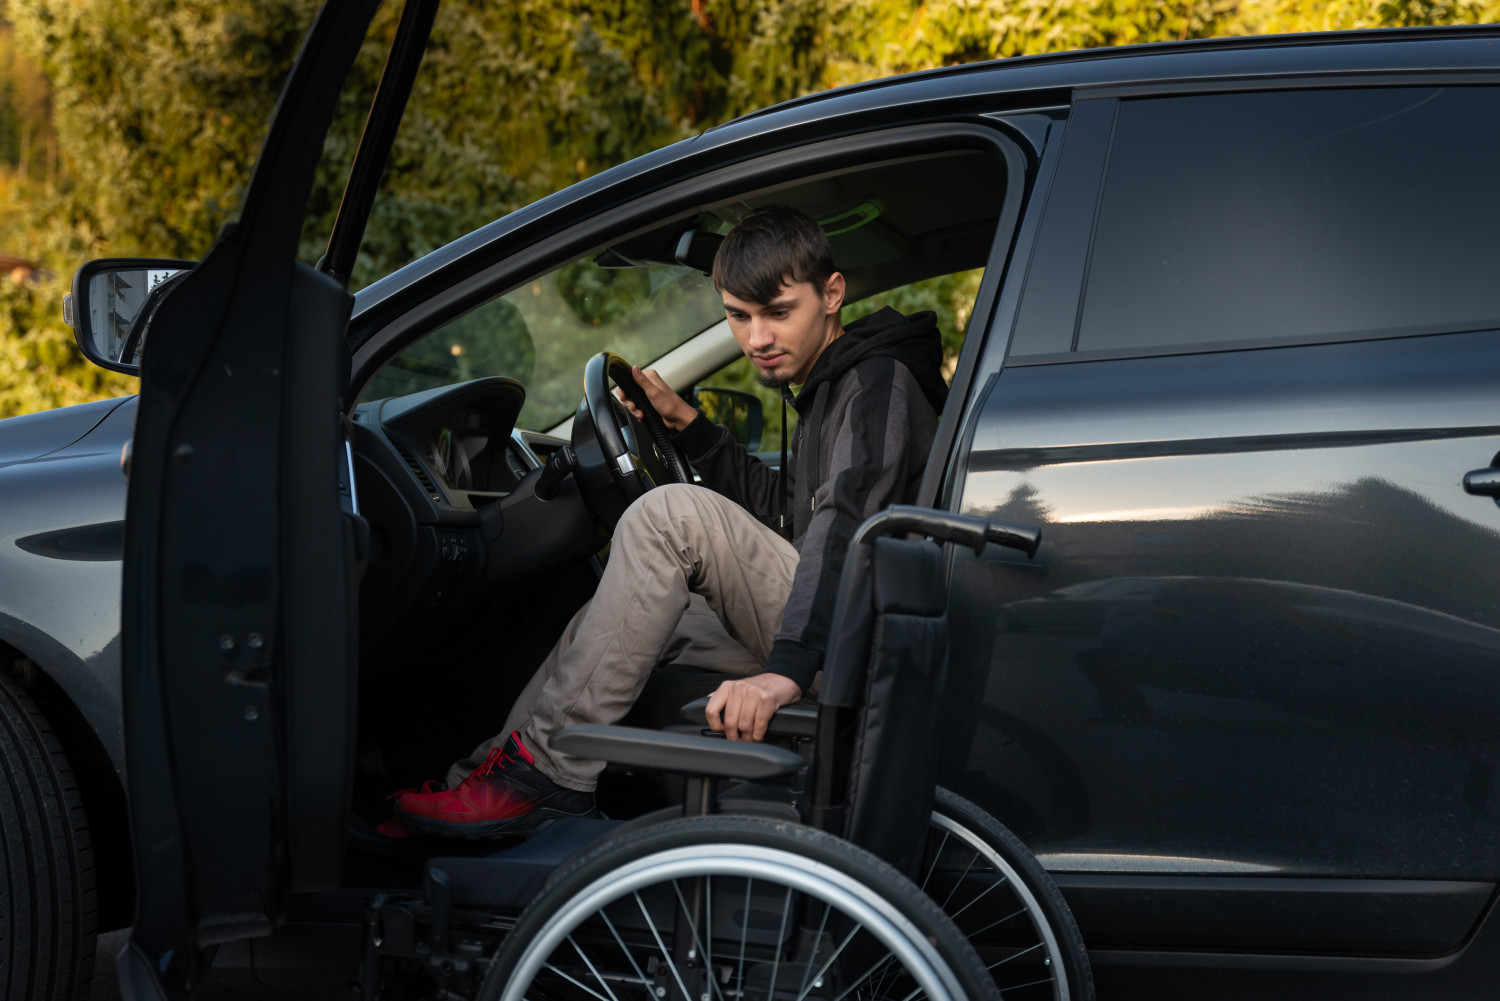 A man is transitioning from a manual wheelchair into the driver's seat of a black car, showcasing the vehicle modifications available to those from the NDIS disability transport services